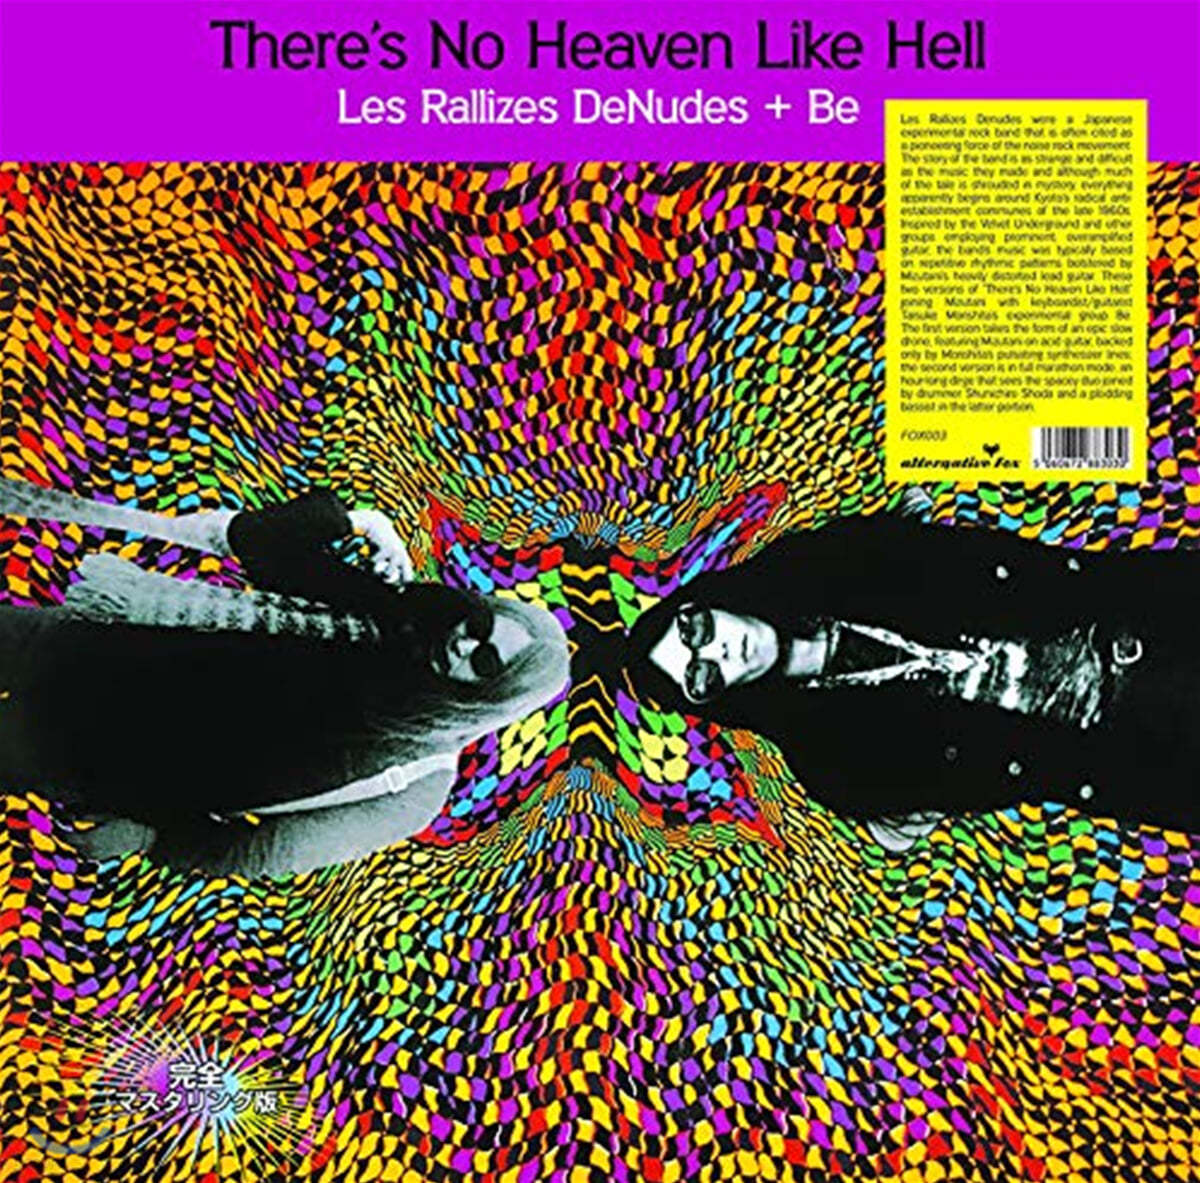 Les Rallizes Denudes (하다카노 라리즈) - There’s No Heaven Like Hell [2LP]